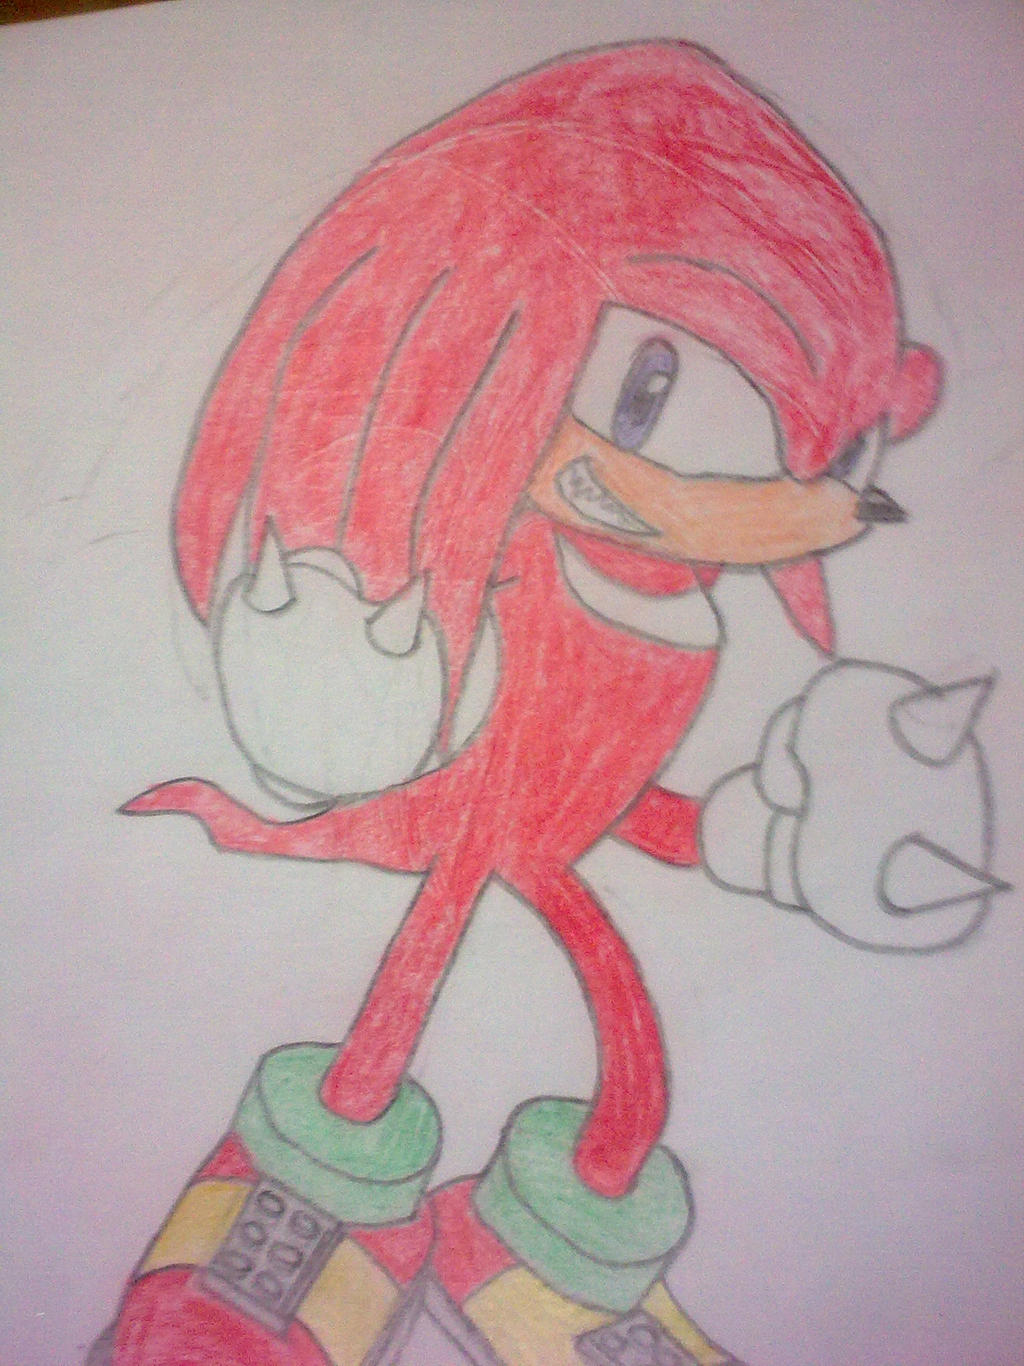 knuckles_the_echidna_drawing_by_eizzoux-d6por9o.jpg